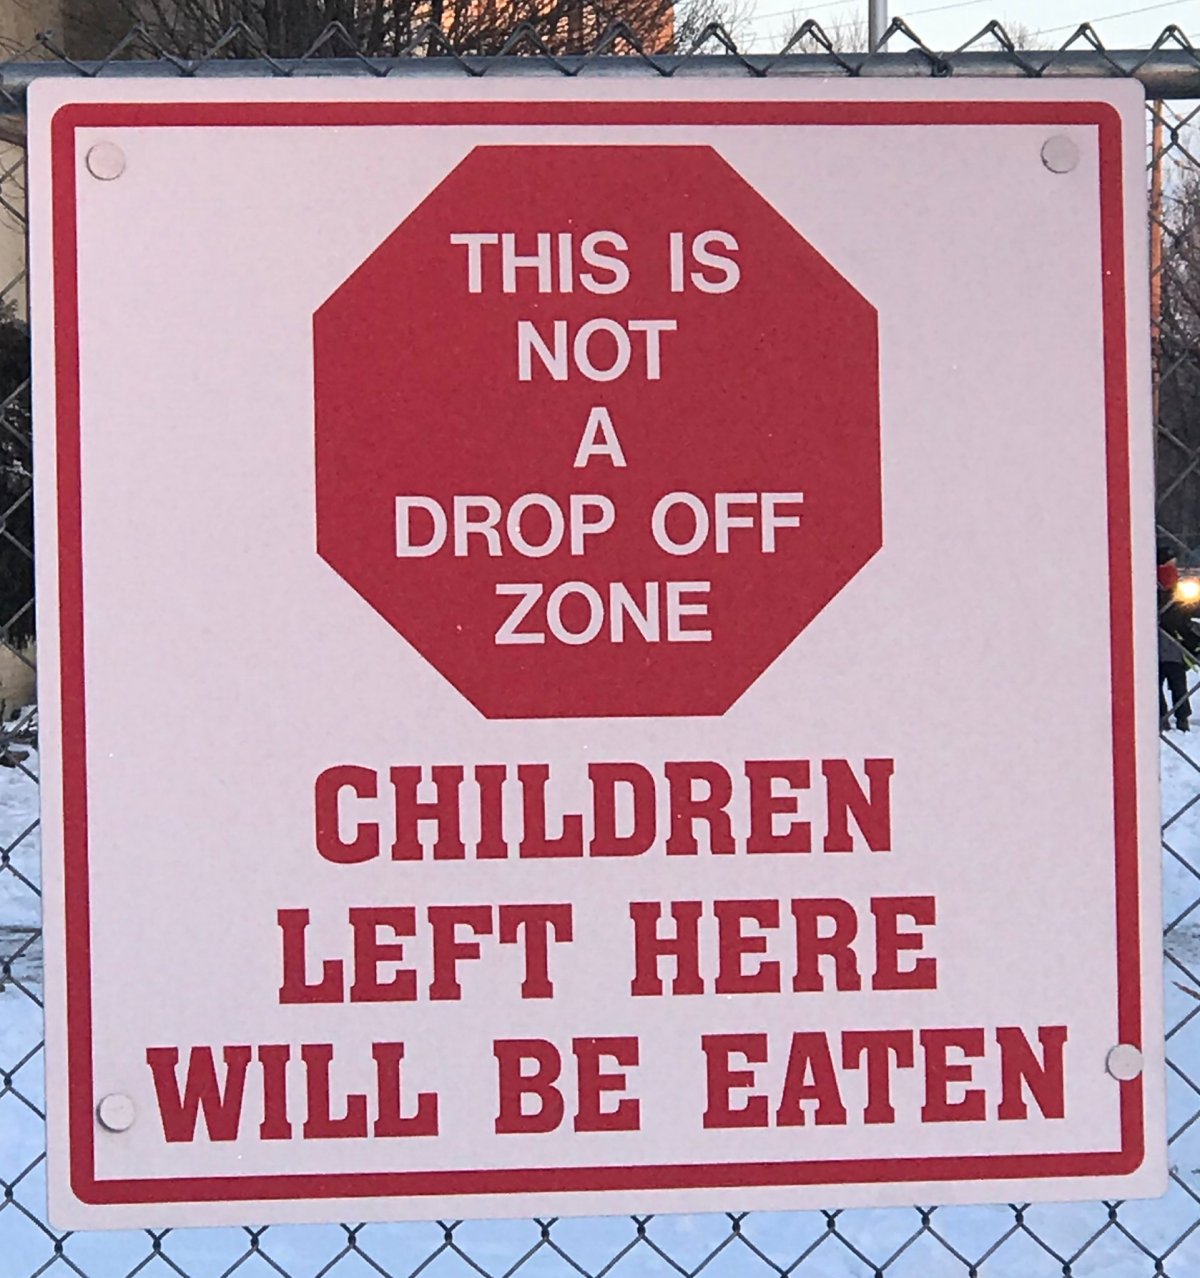 The offending sign.